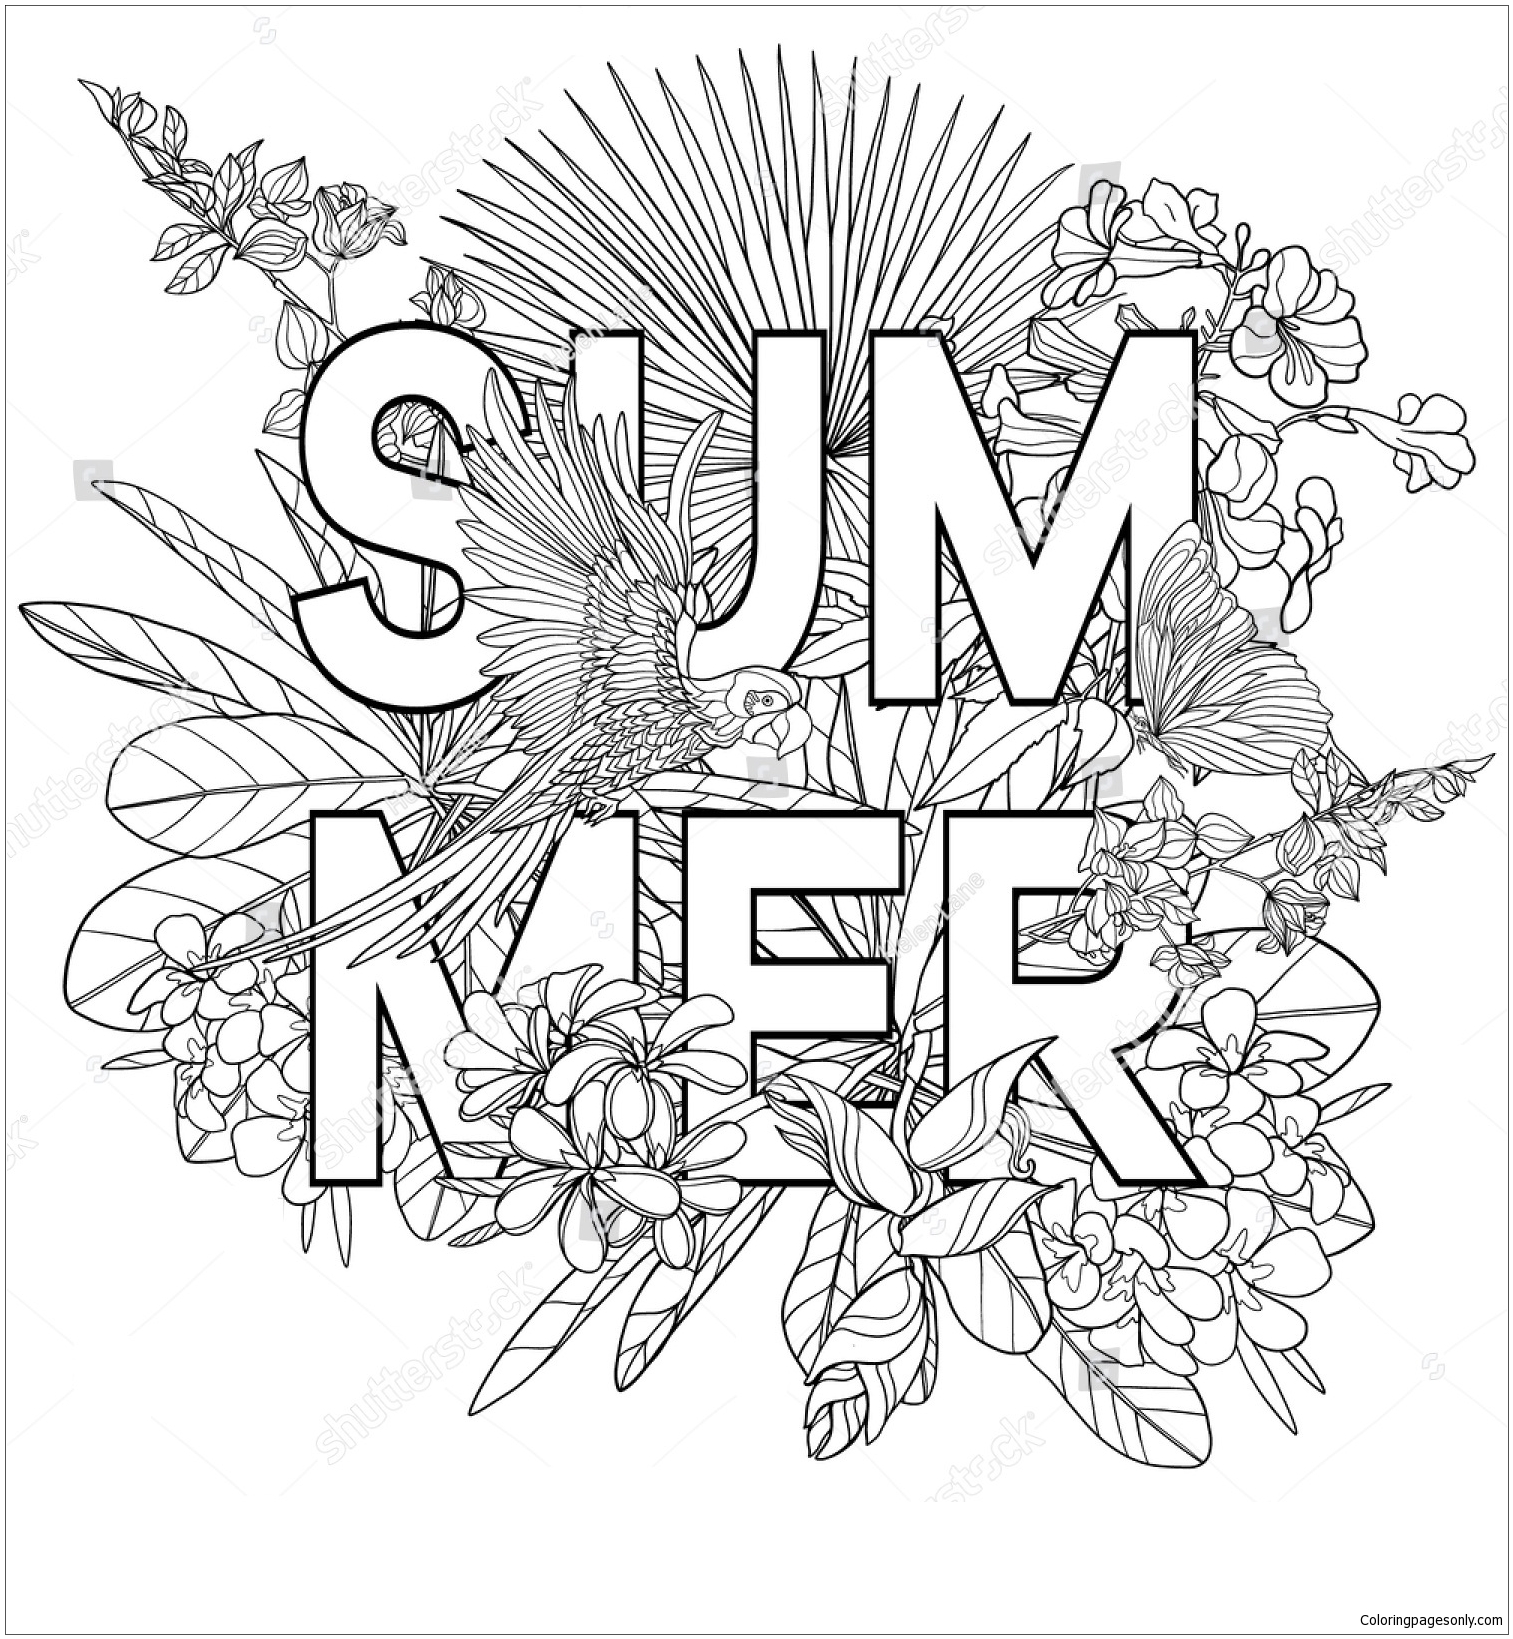 the-word-summer-coloring-pages-summer-coloring-pages-coloring-pages